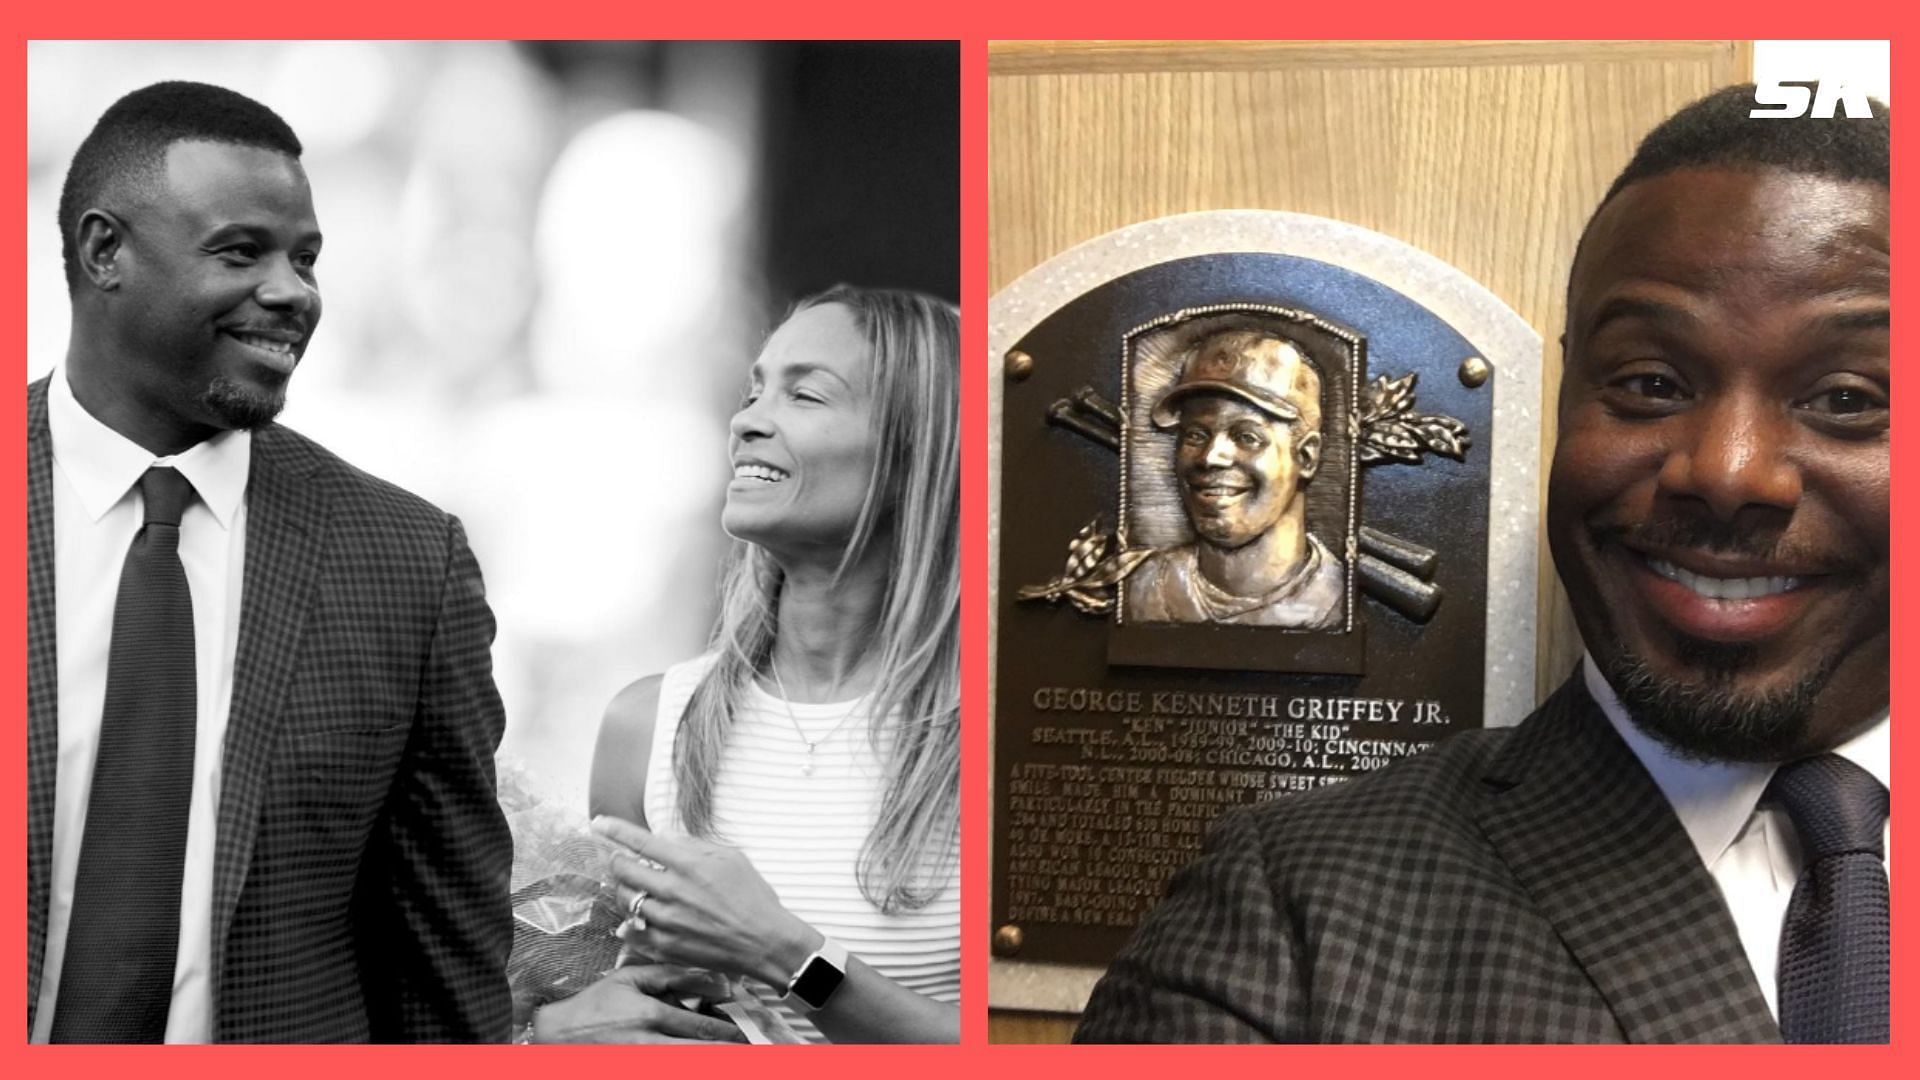 Ken Griffey Jr gets emotional and is conforted by his wife Melissa